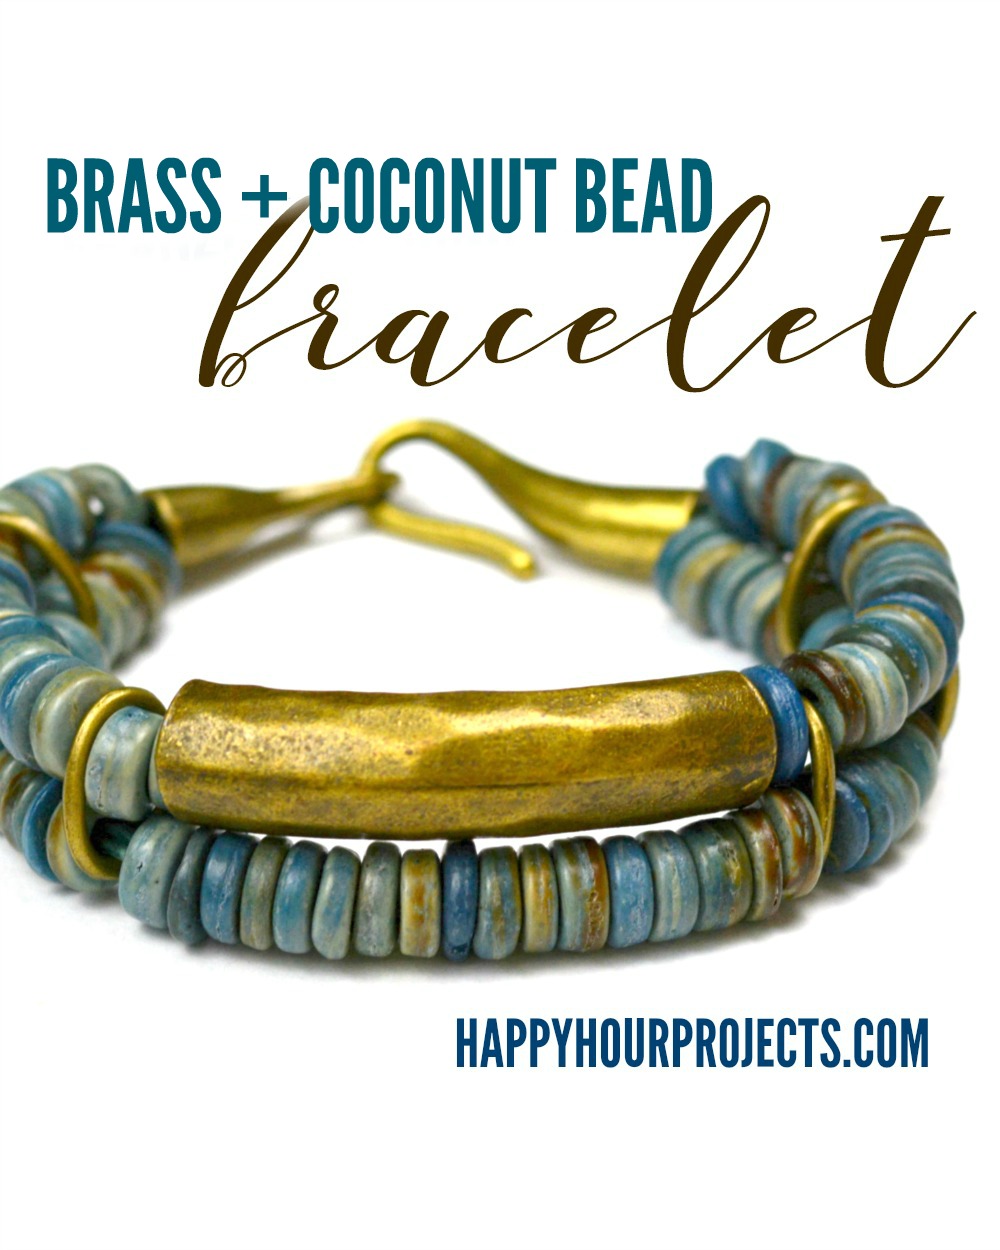 Coconut + Brass DIY Bead Bracelet at happyhourprojects.com #DIY #jewelry #fashion #crafts #accessories